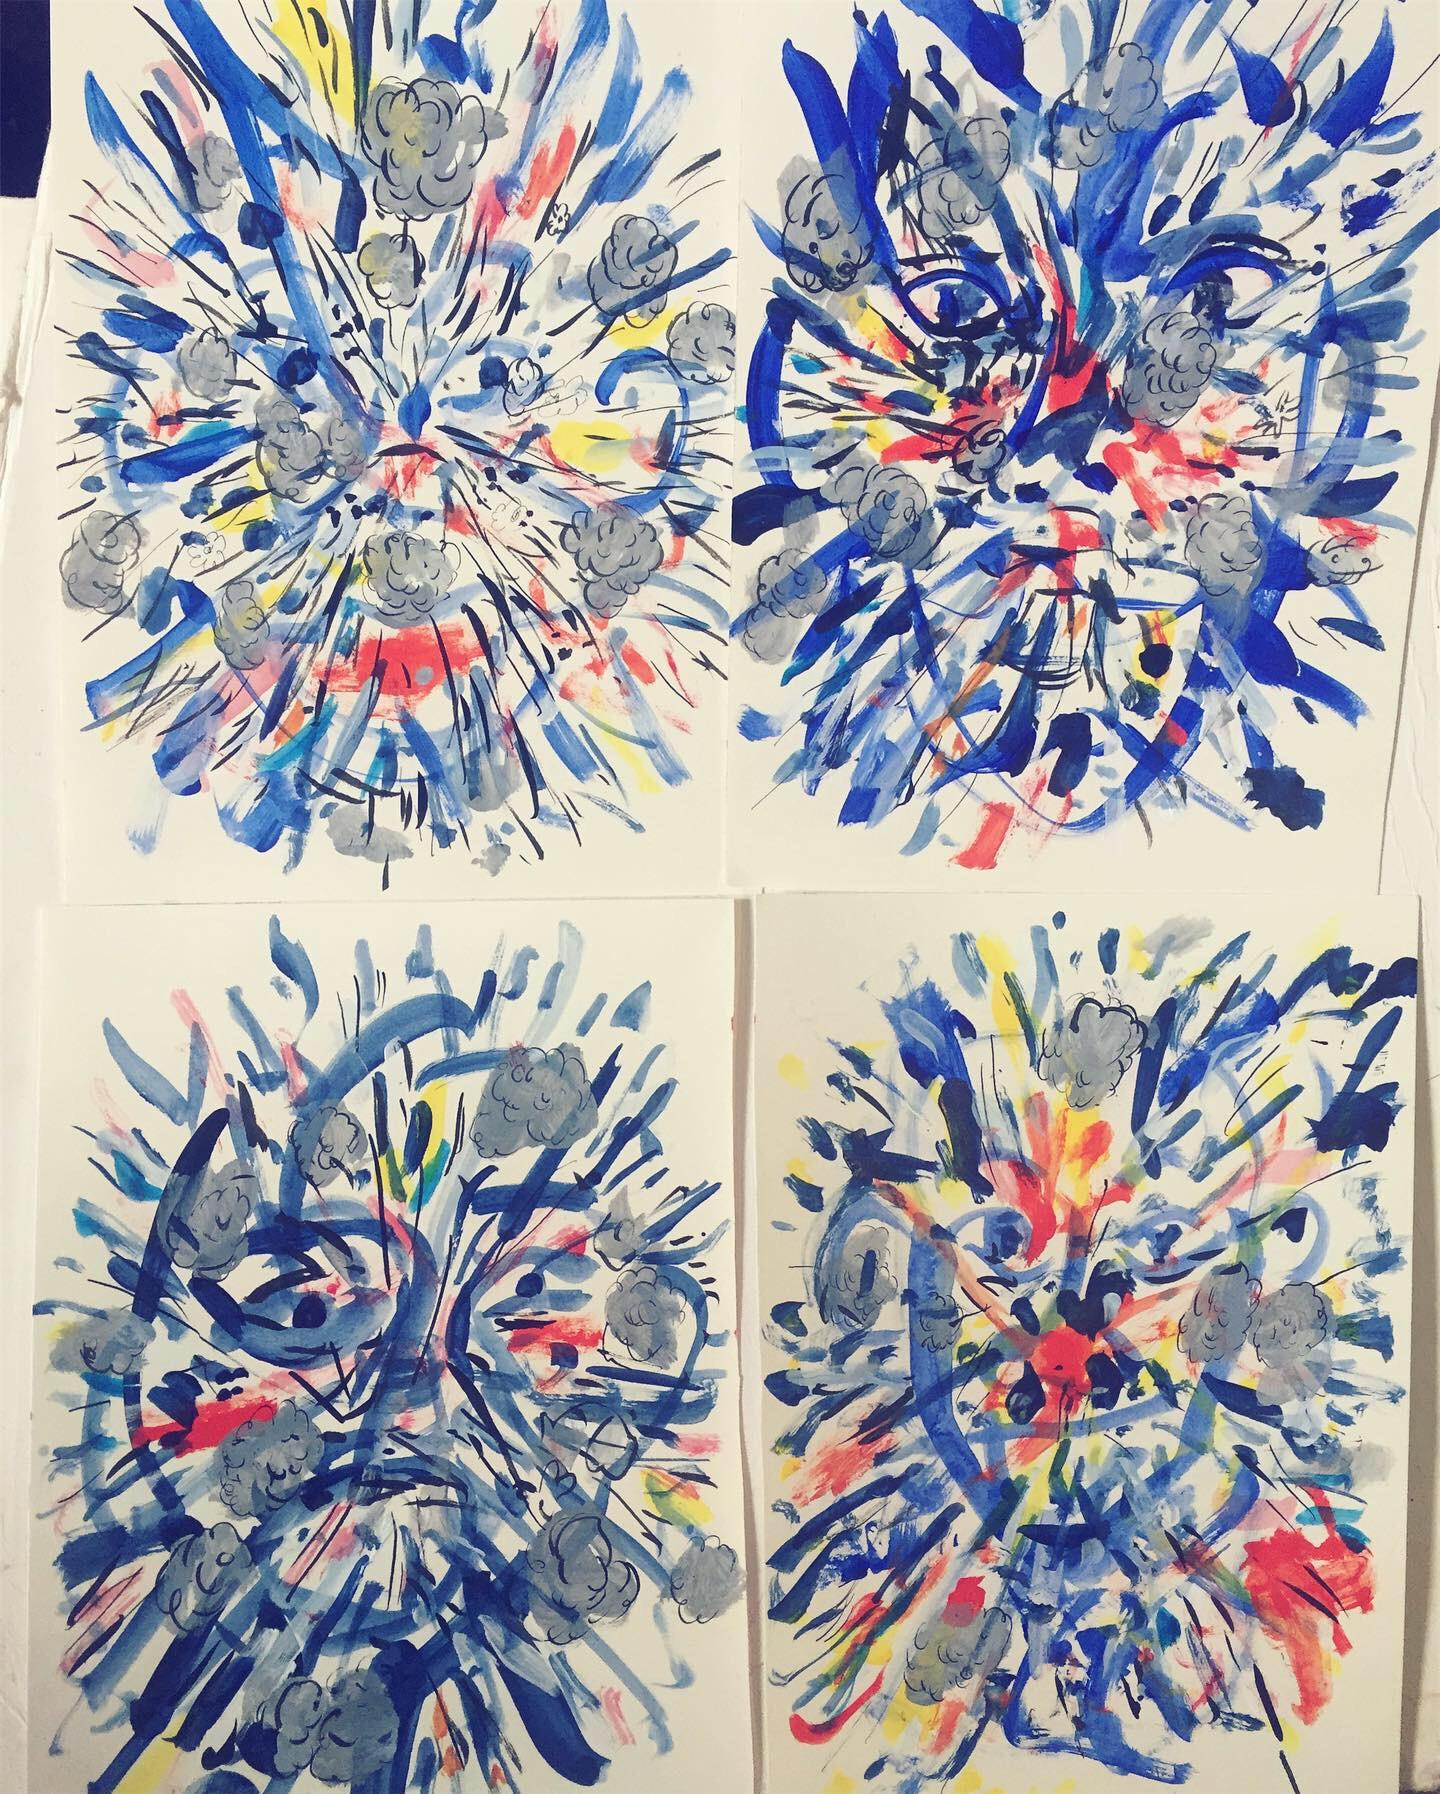 Face Explosion 3  (3 of 4 suite) 9x12 inches on paper - Art by Nina Bovasso